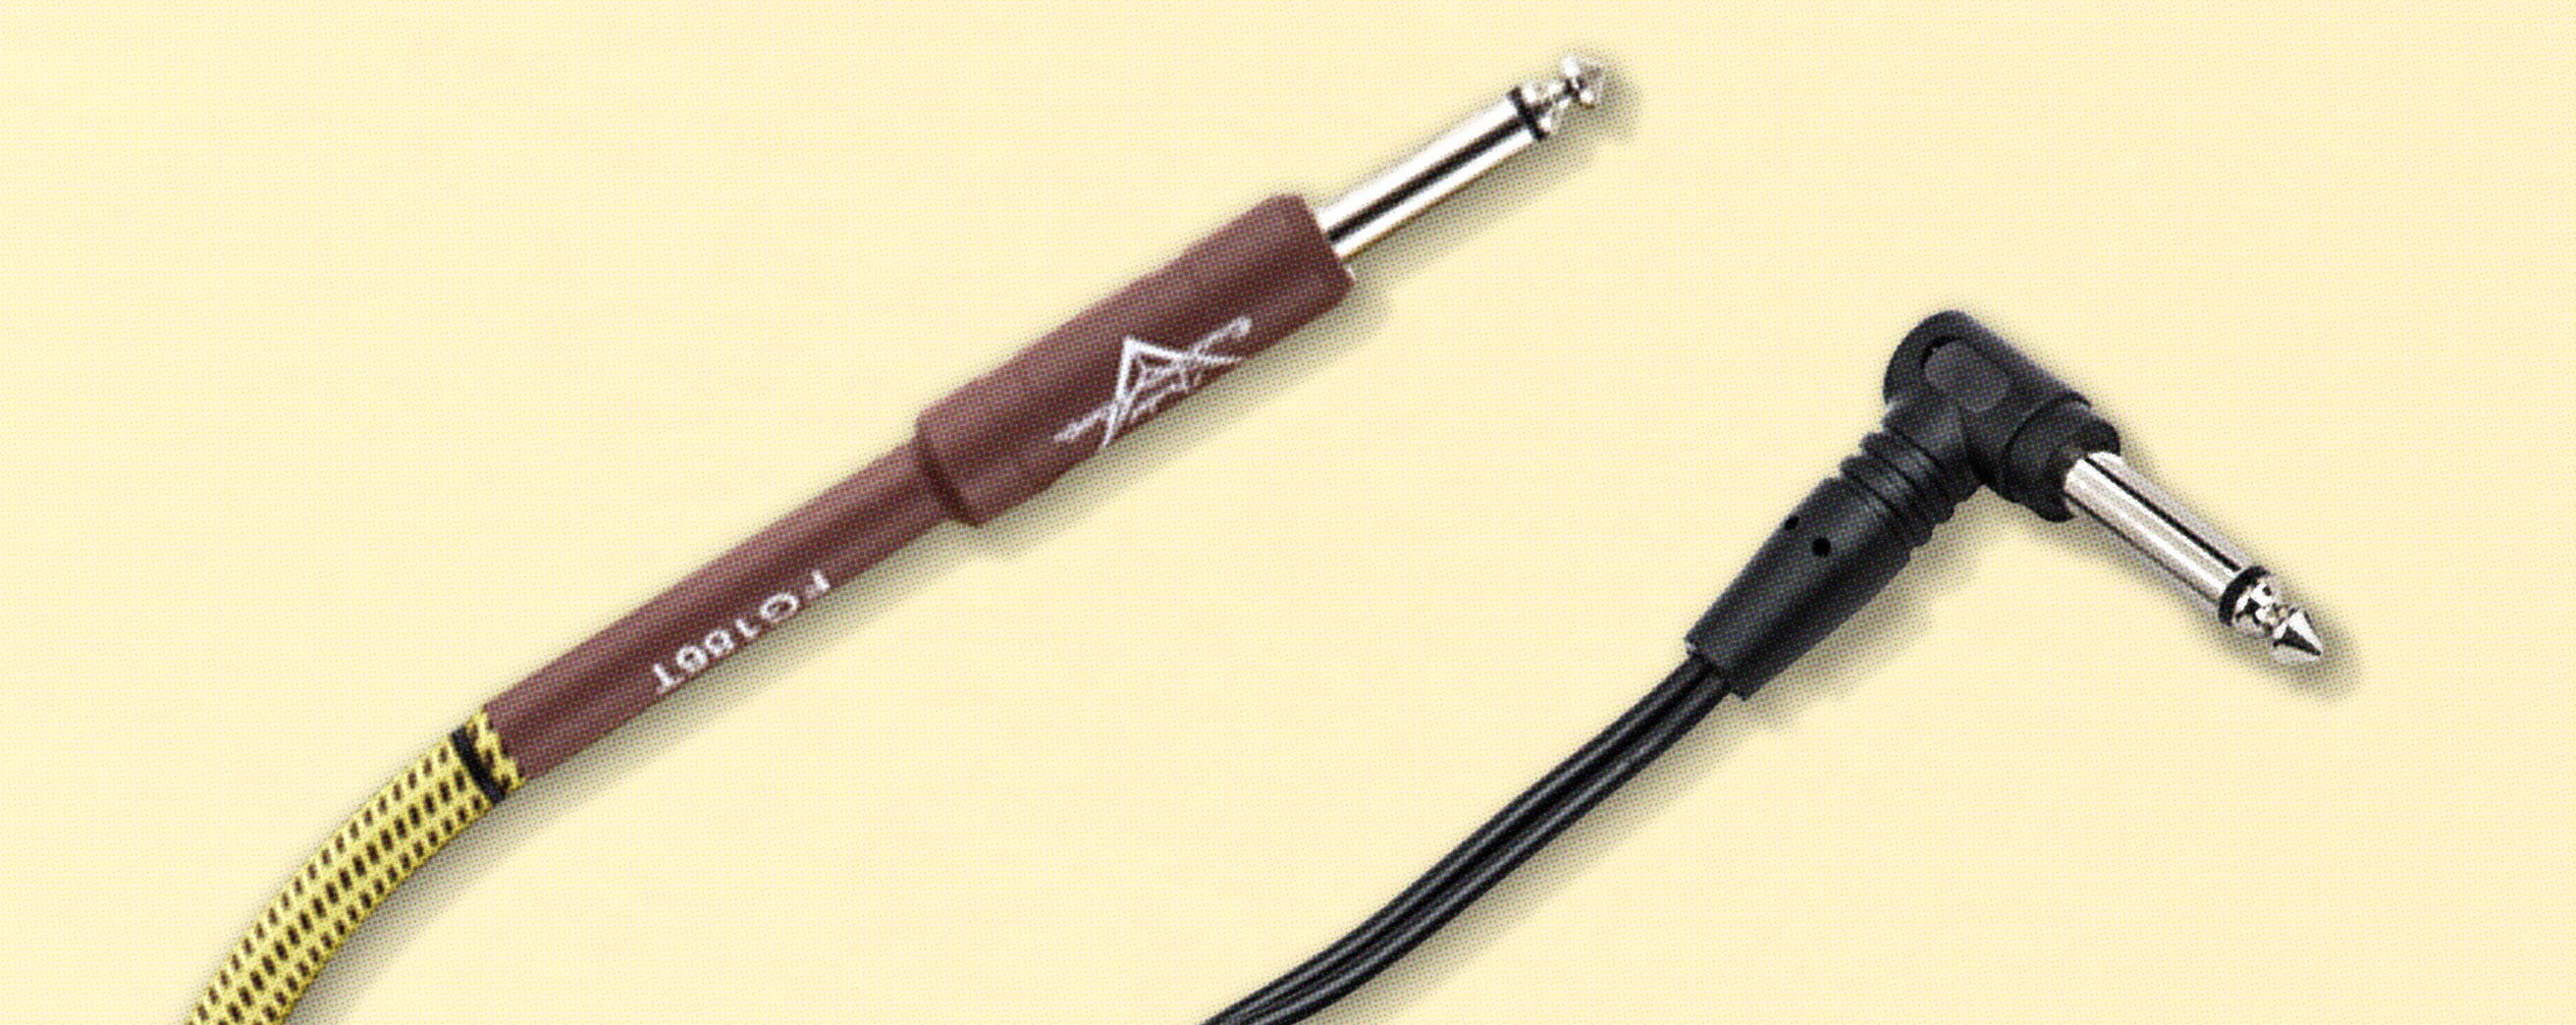 Can you use instrument cables as speaker cables? No. But why?